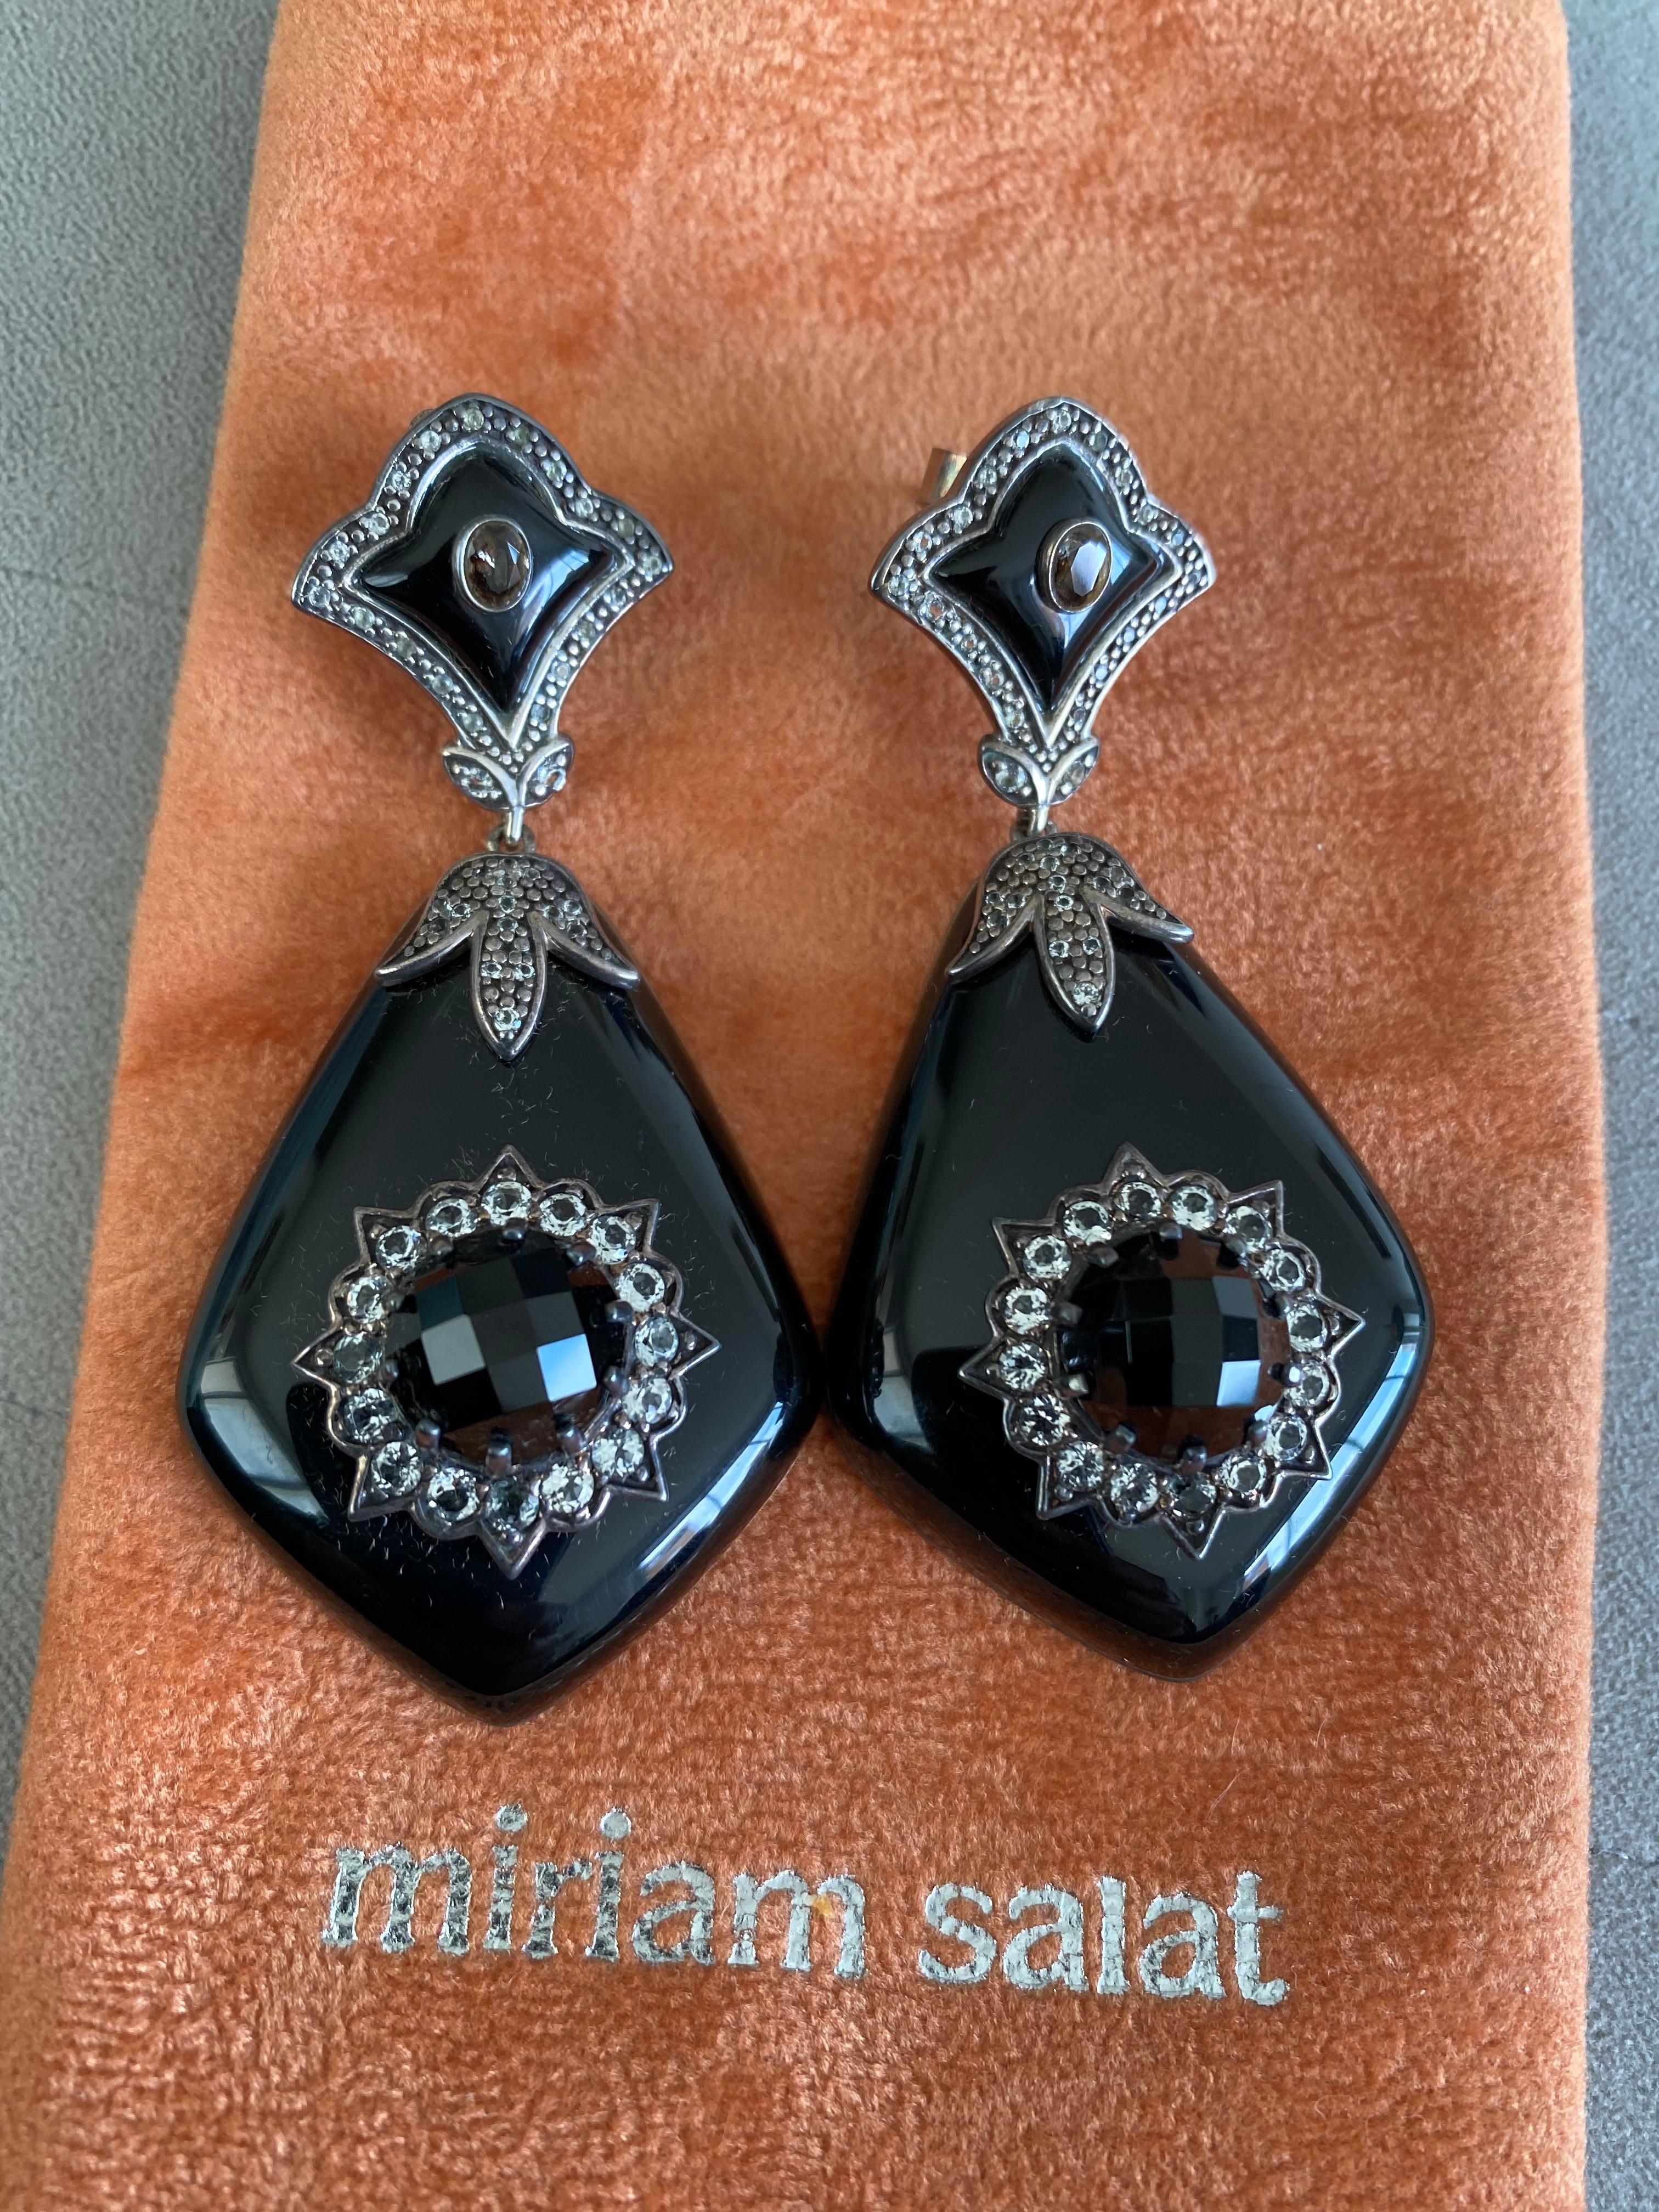 Miriam Salat (MRM) Black resin and White Topaz Drop Semi Precious Earrings - This fantastic Miriam Salat earrings feature a middle eastern design made up of black and white topaz full facet stones, set in sterling silver on Black resin. Channel set